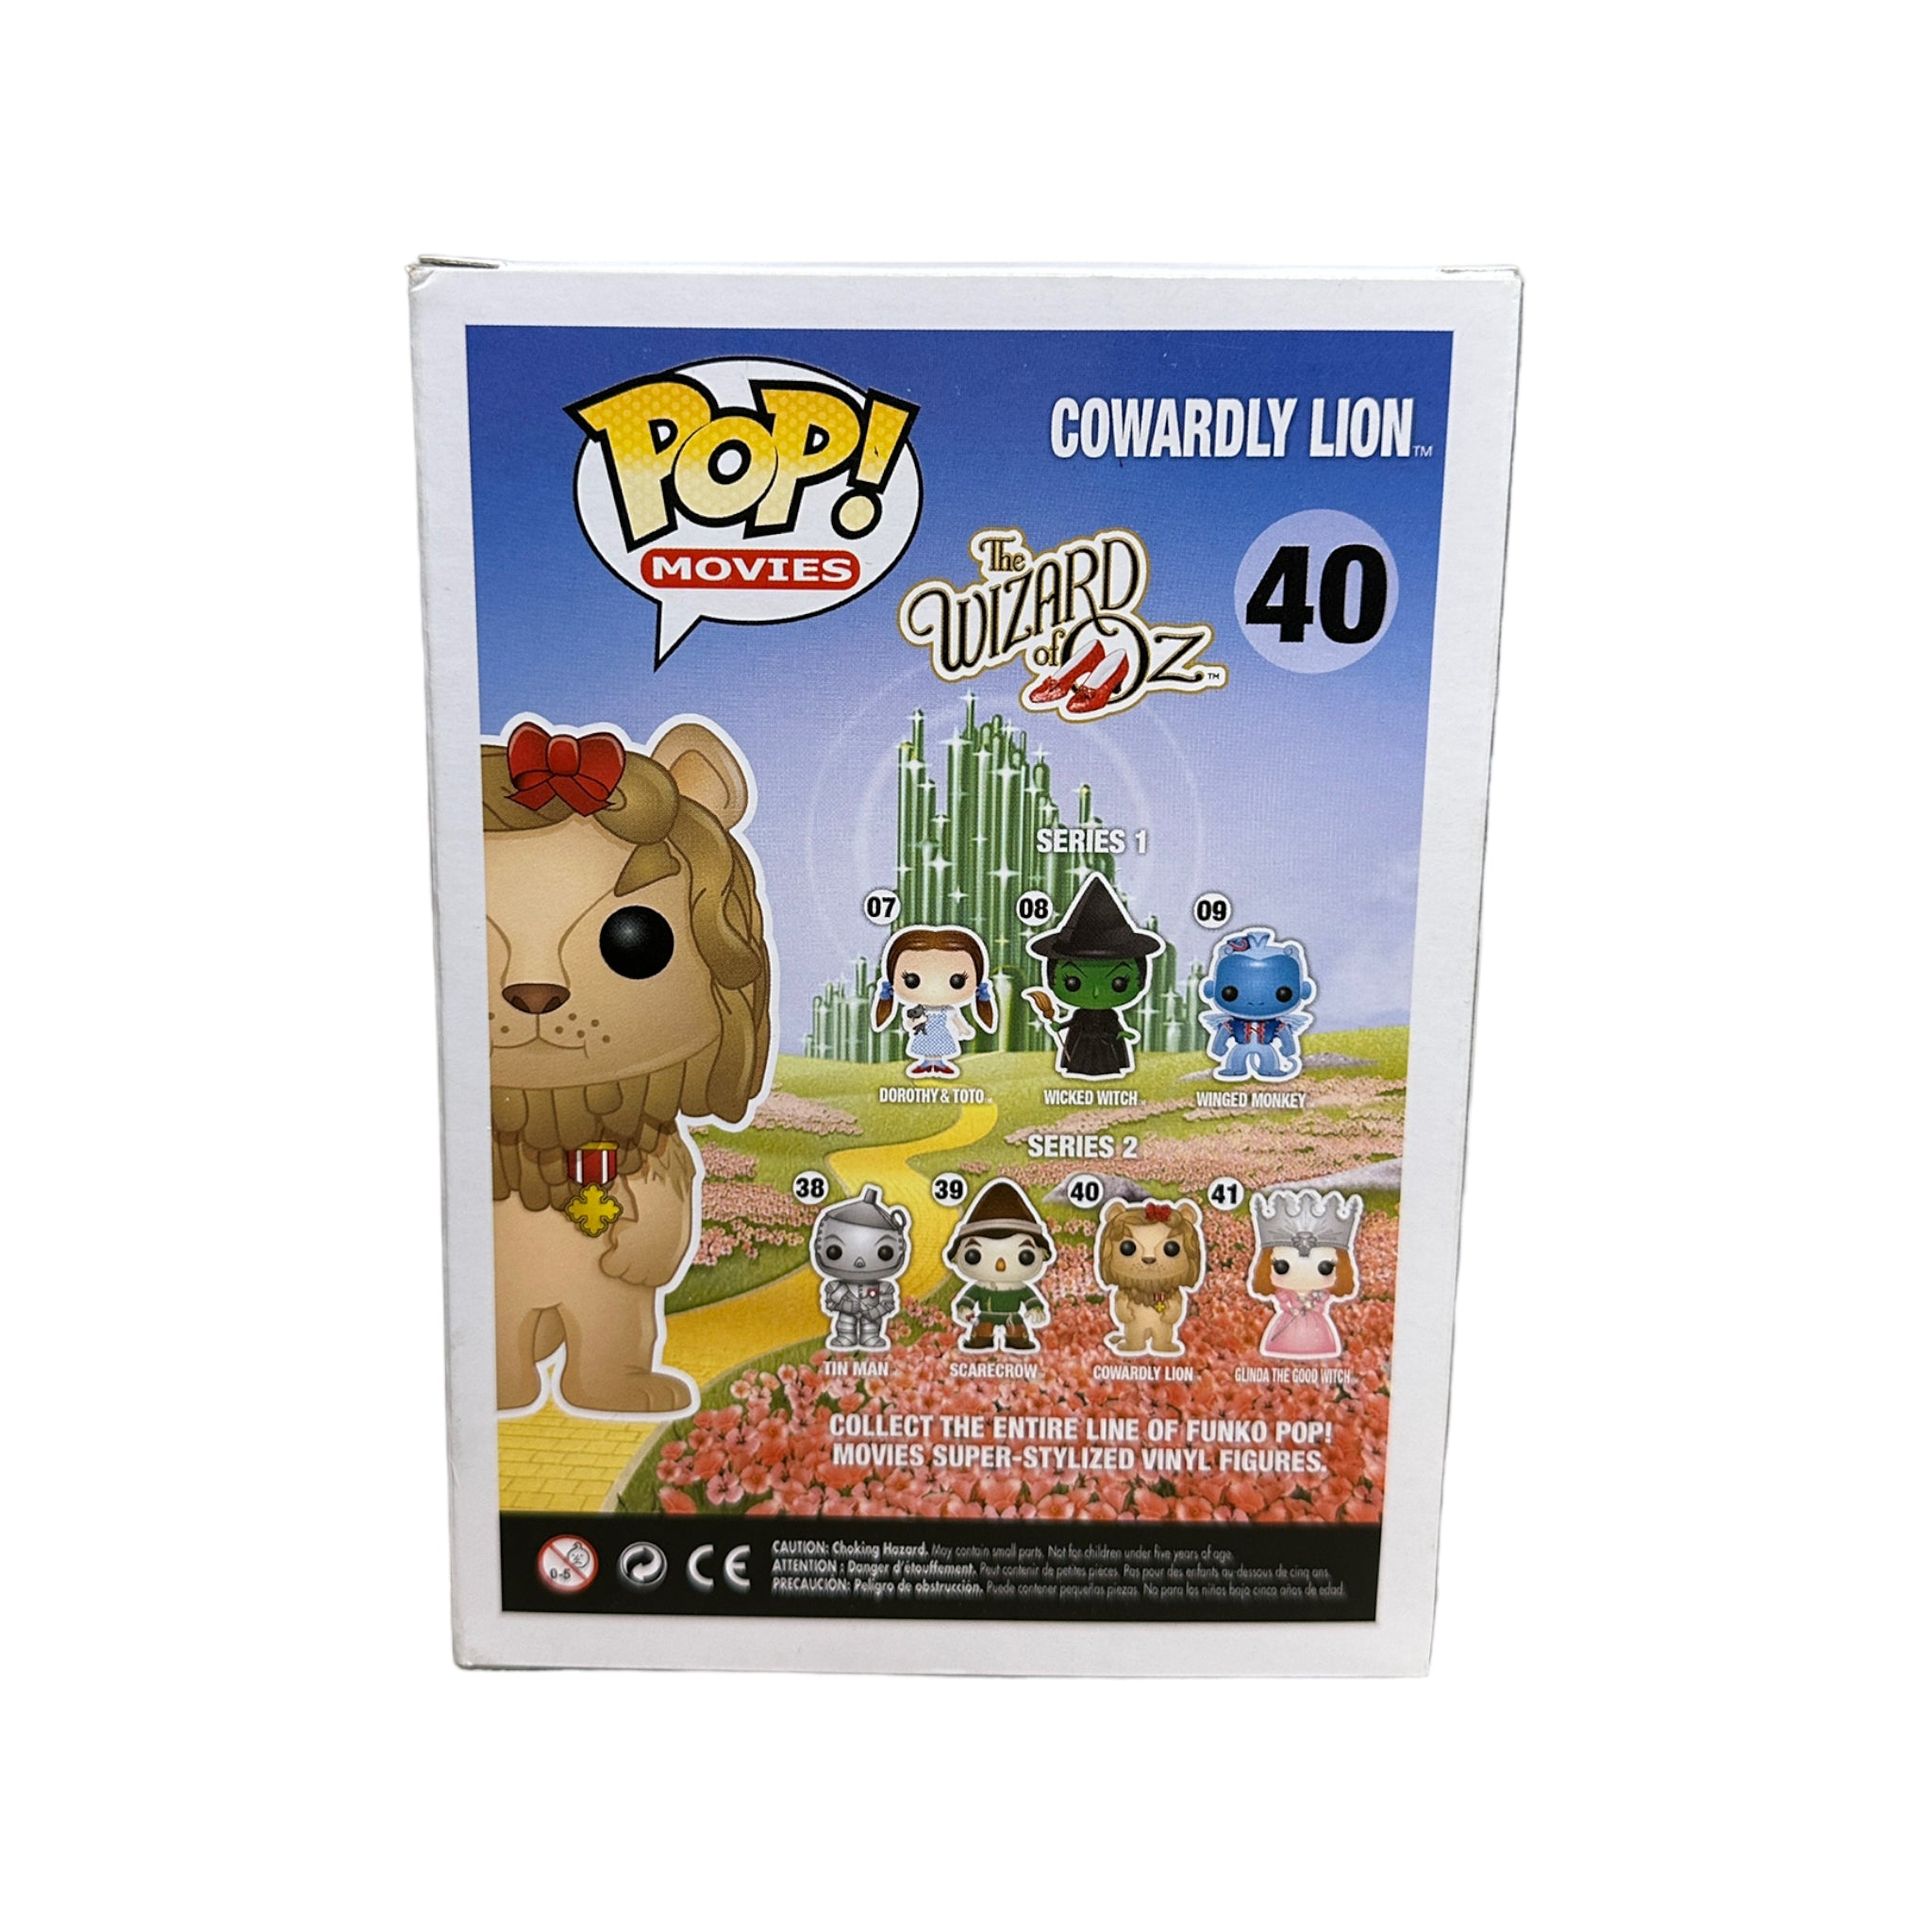 Cowardly Lion #40 (Flocked) Funko Pop! - The Wizard of Oz - Gemini Collectibles Exclusive - Condition 8.75/10